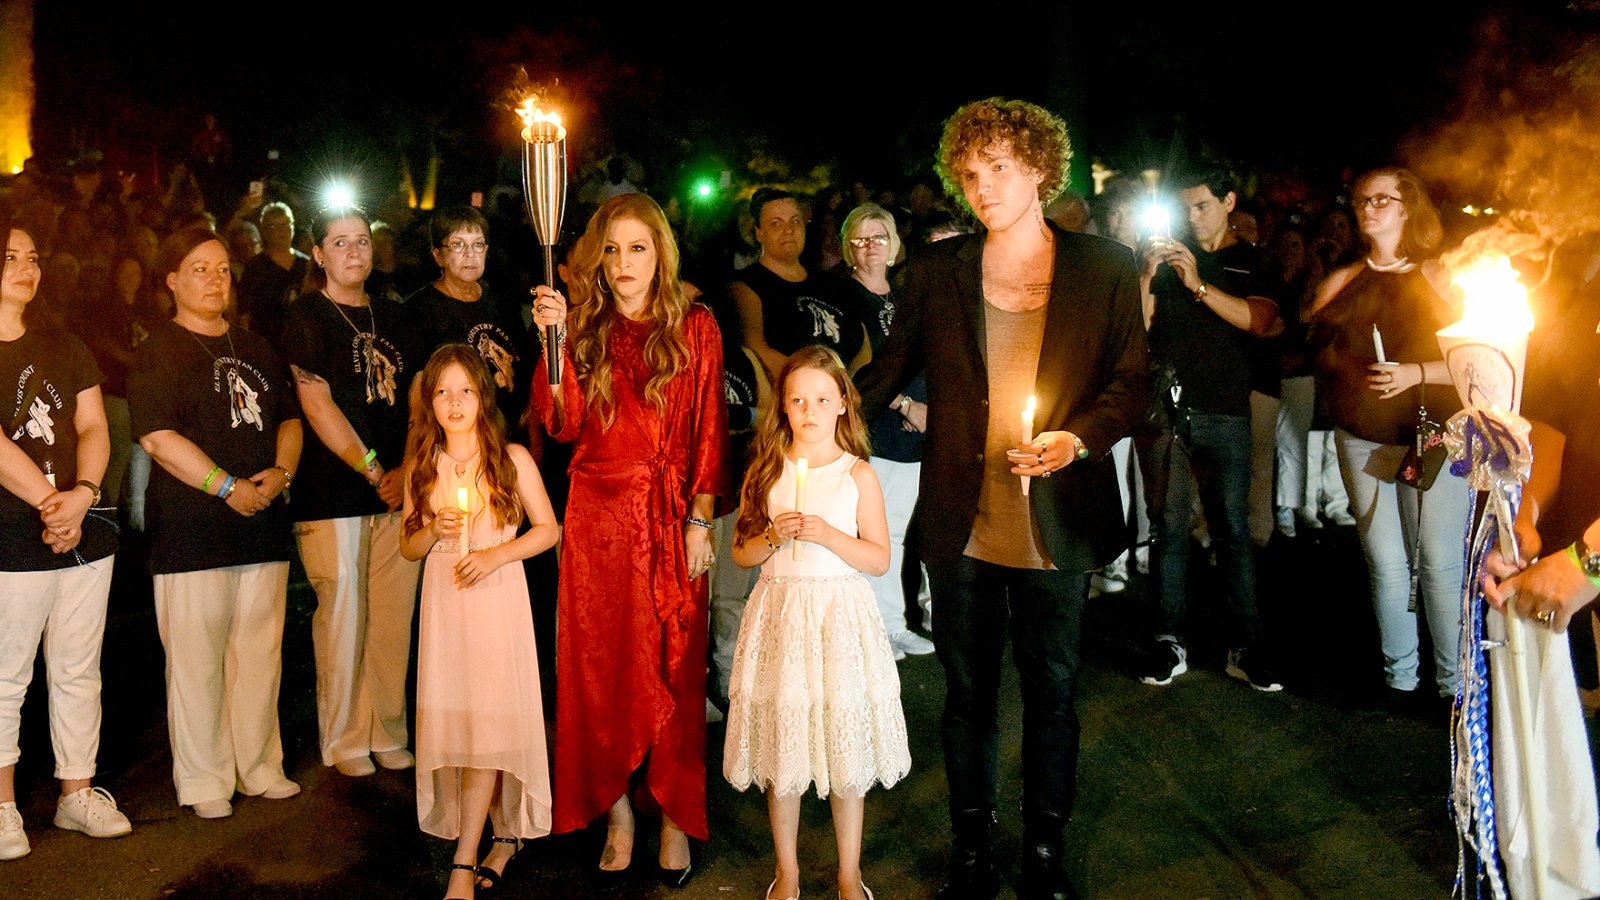 On the 40th anniversary of his passing, Harper Lockwood, Lisa Marie Presley, Finley Lockwood, and Ben Keough joined over 50 thousand people for the candlelight vigil at Graceland, in honor of Elvis.